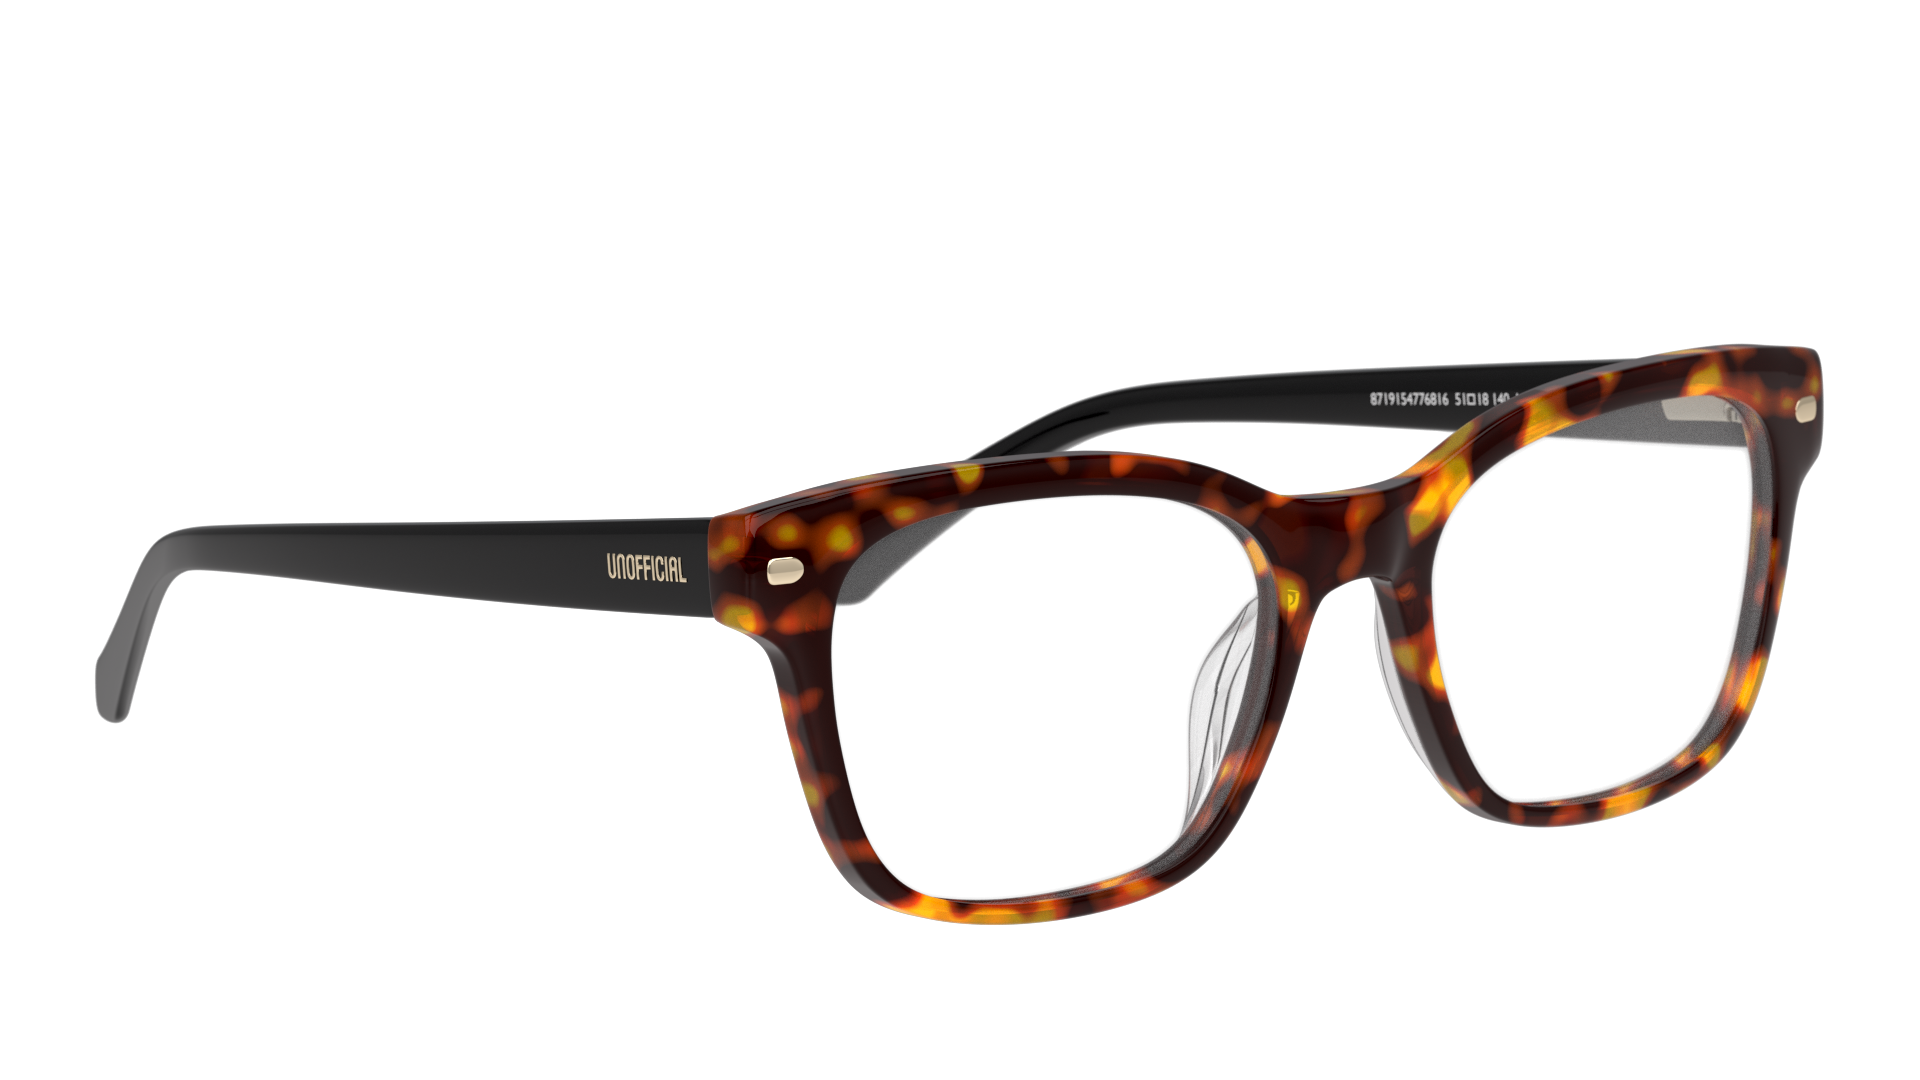 Angle_Right01 Unofficial UNOF0246 Glasses Transparent / Tortoise Shell